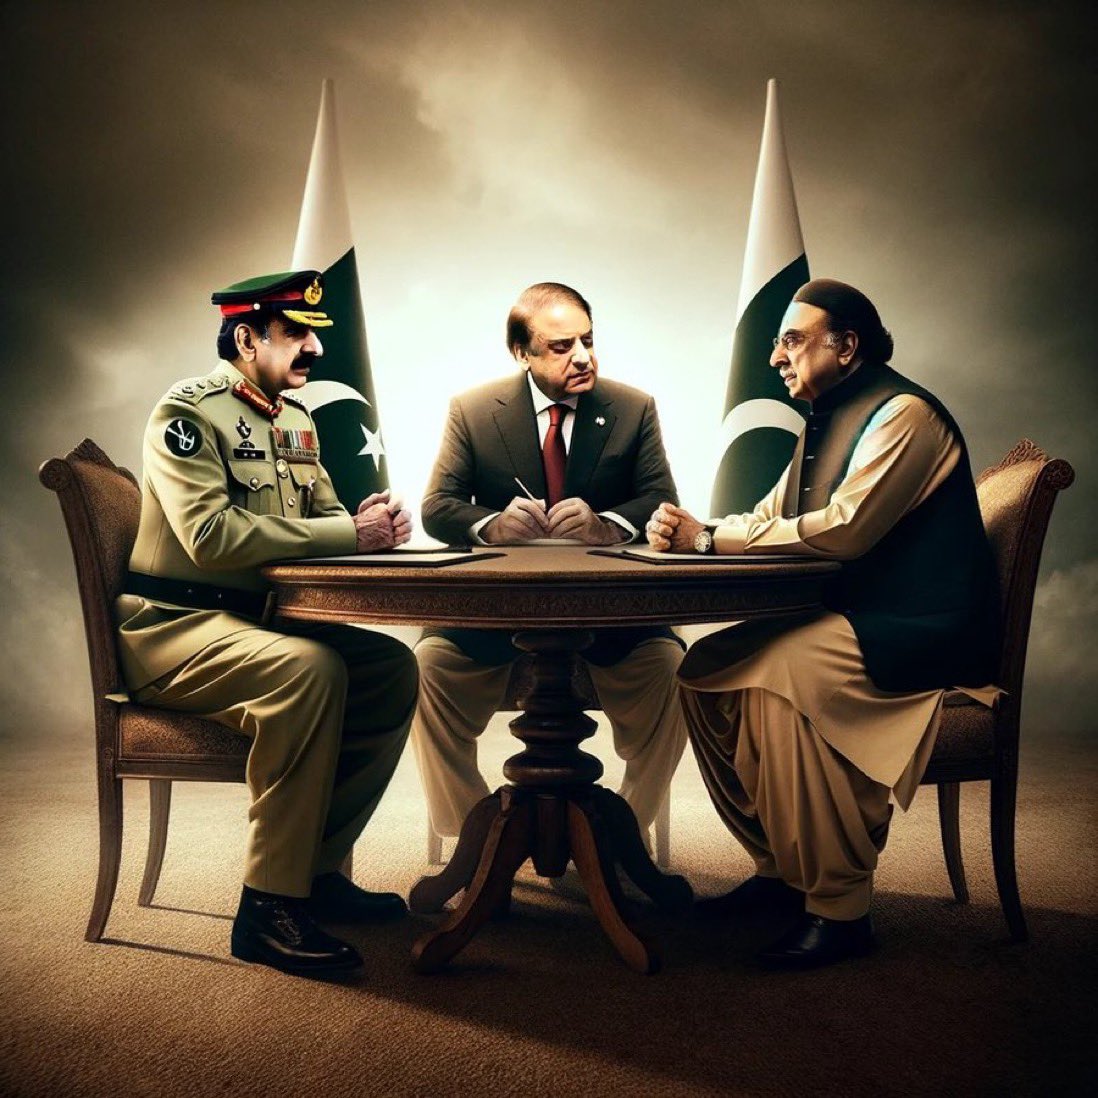 Is this the dictatorship that ousted and imprisoned Imran Khan in Pakistan? 

Meet Team Corrupt: 

General Asim Munir
Nawaz Sharif 
Asif Ali Zardari 

These people have destroyed Pakistan for their own personal gain and are now preventing free speech with the recent ban on 𝕏.